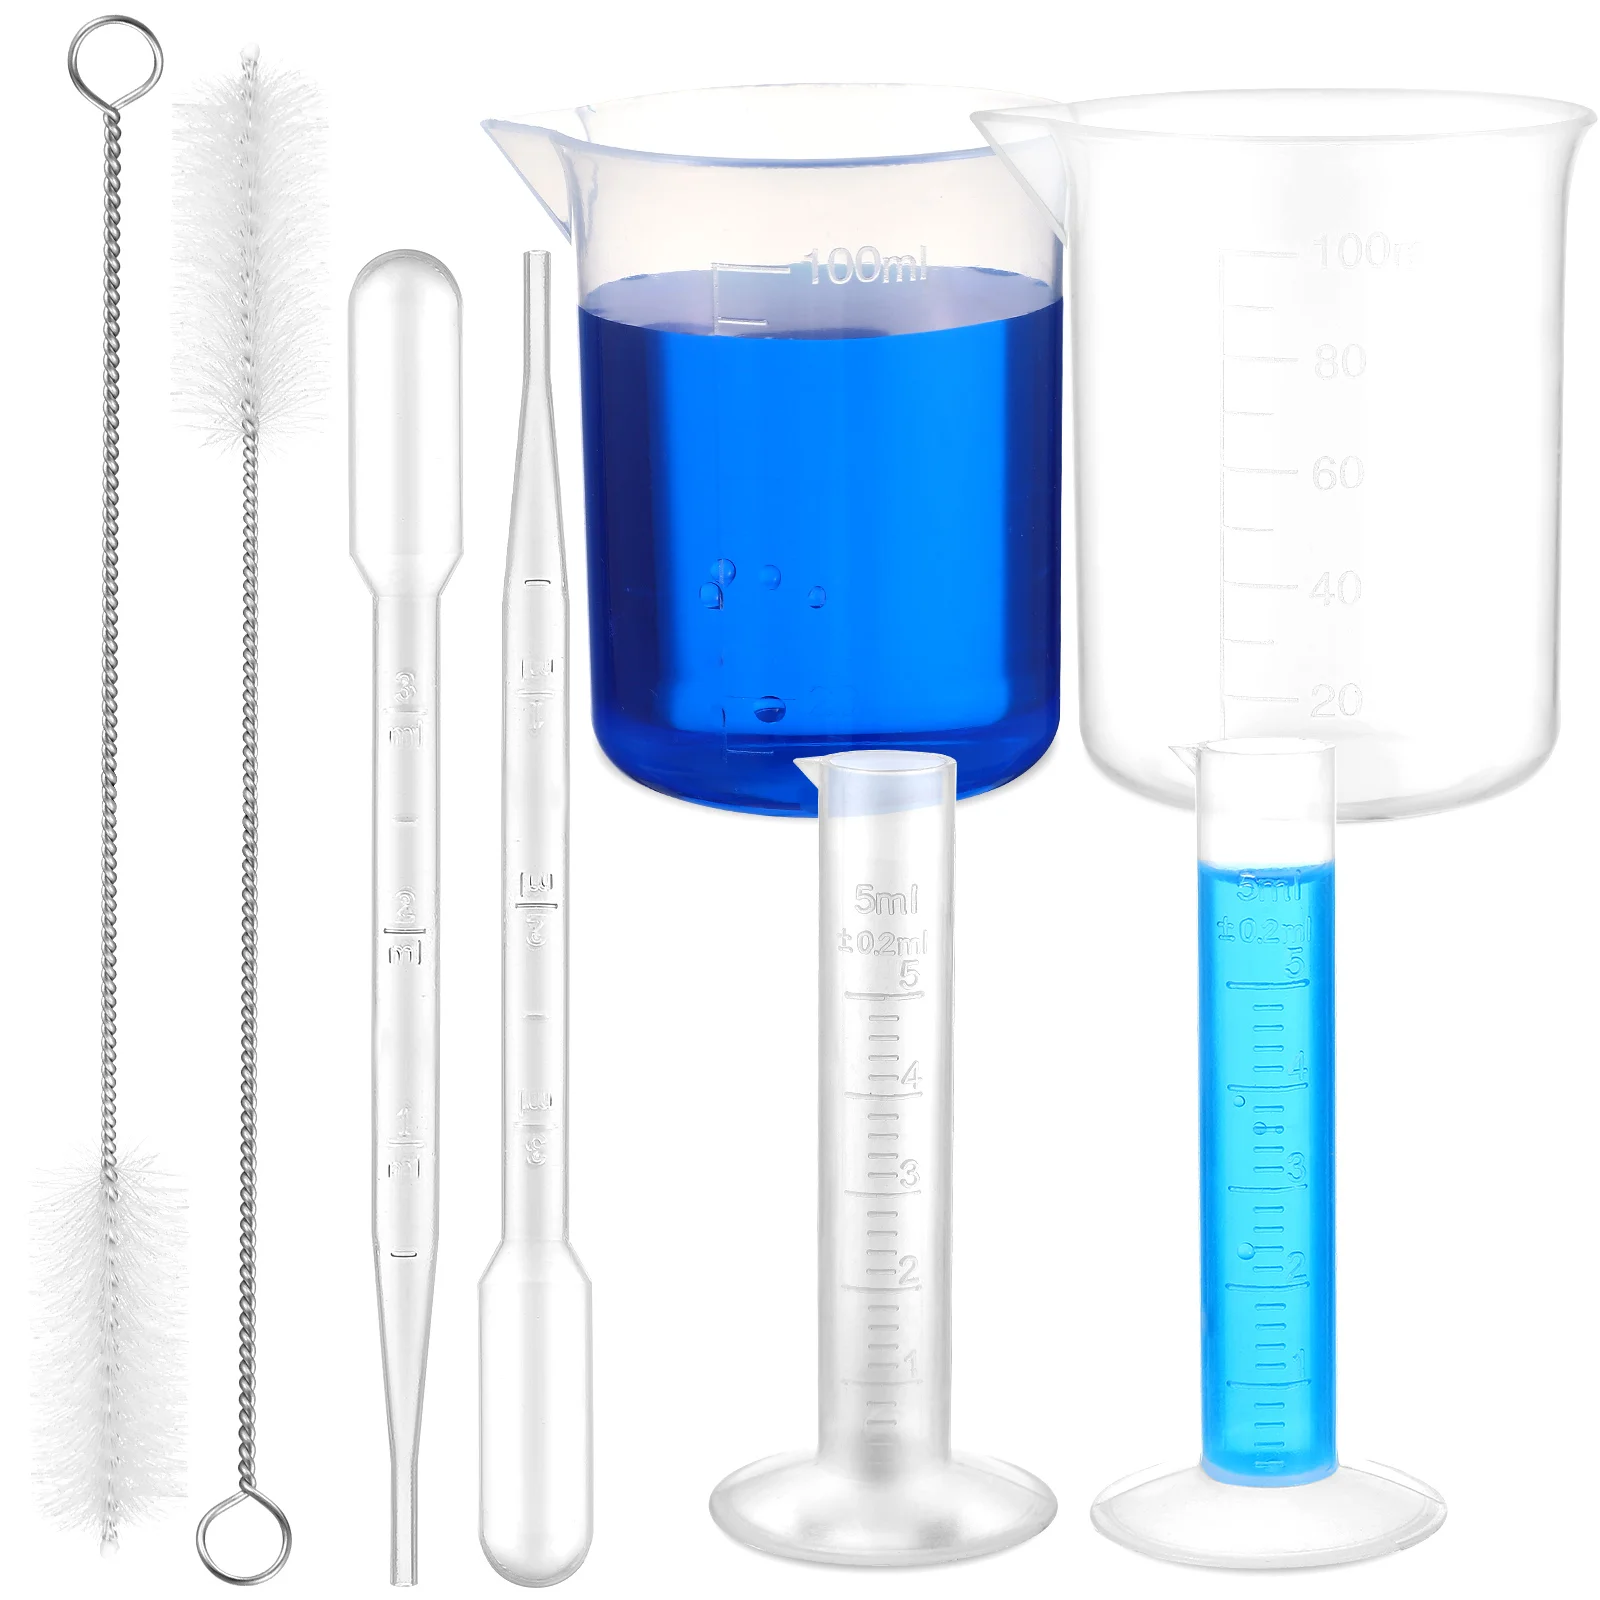 

Beaker Test Glass Measuring Cups Plastic Graduated Cylinders Tube Brushes Flask Text Tubes Transfer Pipettes Child